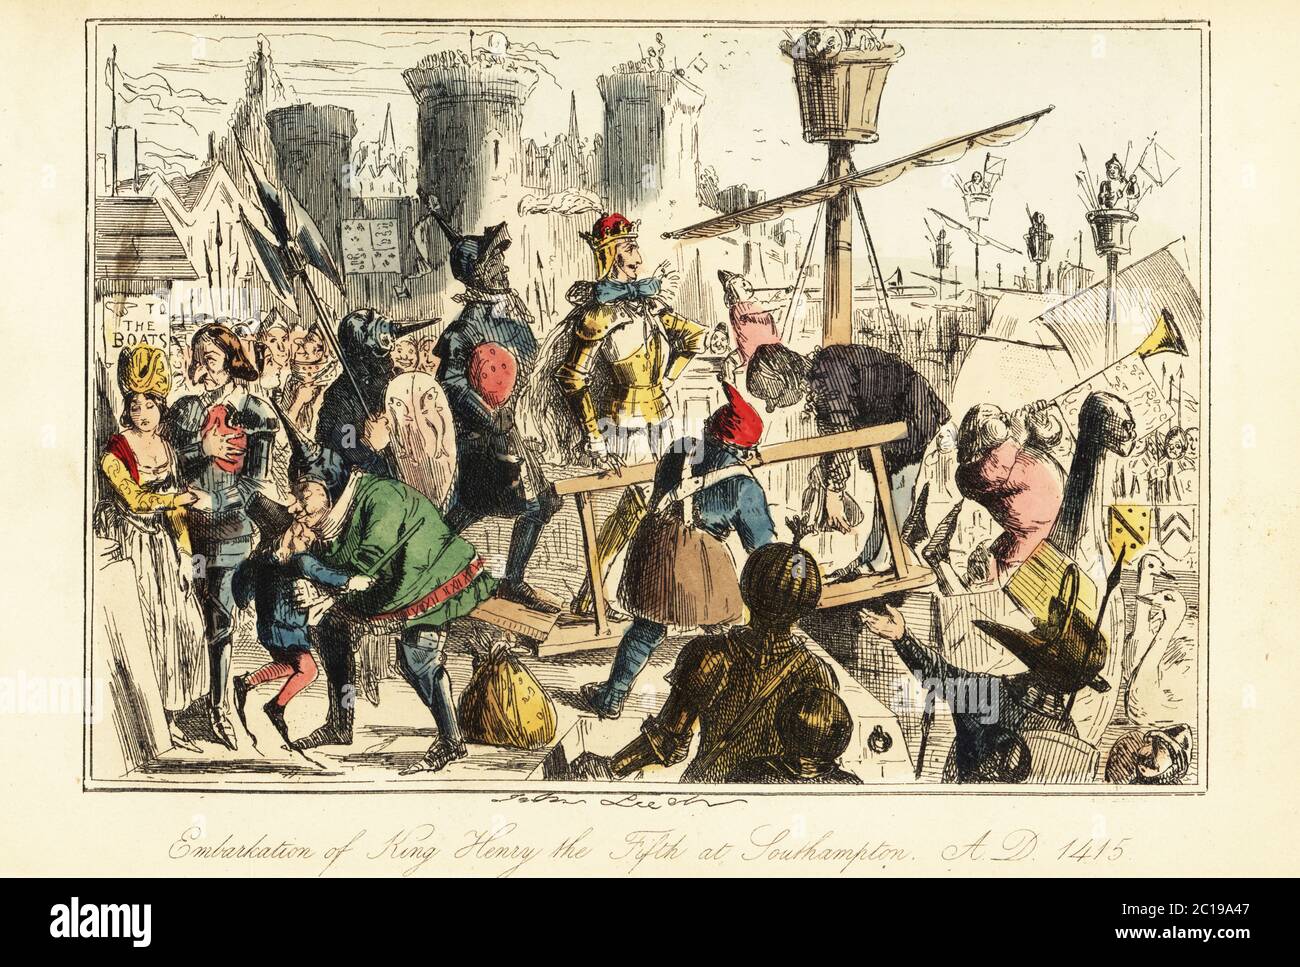 King Henry V of England boarding the Trinity at Southampton, 10 August 1415. The king in crown, helm and suit of armor. Knights in plate armor with comical helmets. Embarkation of King Henry V at Southampton 1415. Handcoloured steel engraving after an illustration by John Leech from Gilbert Abbott A’Beckett’s Comic History of England, Bradbury, Agnew & Co., London, 1880. Stock Photo